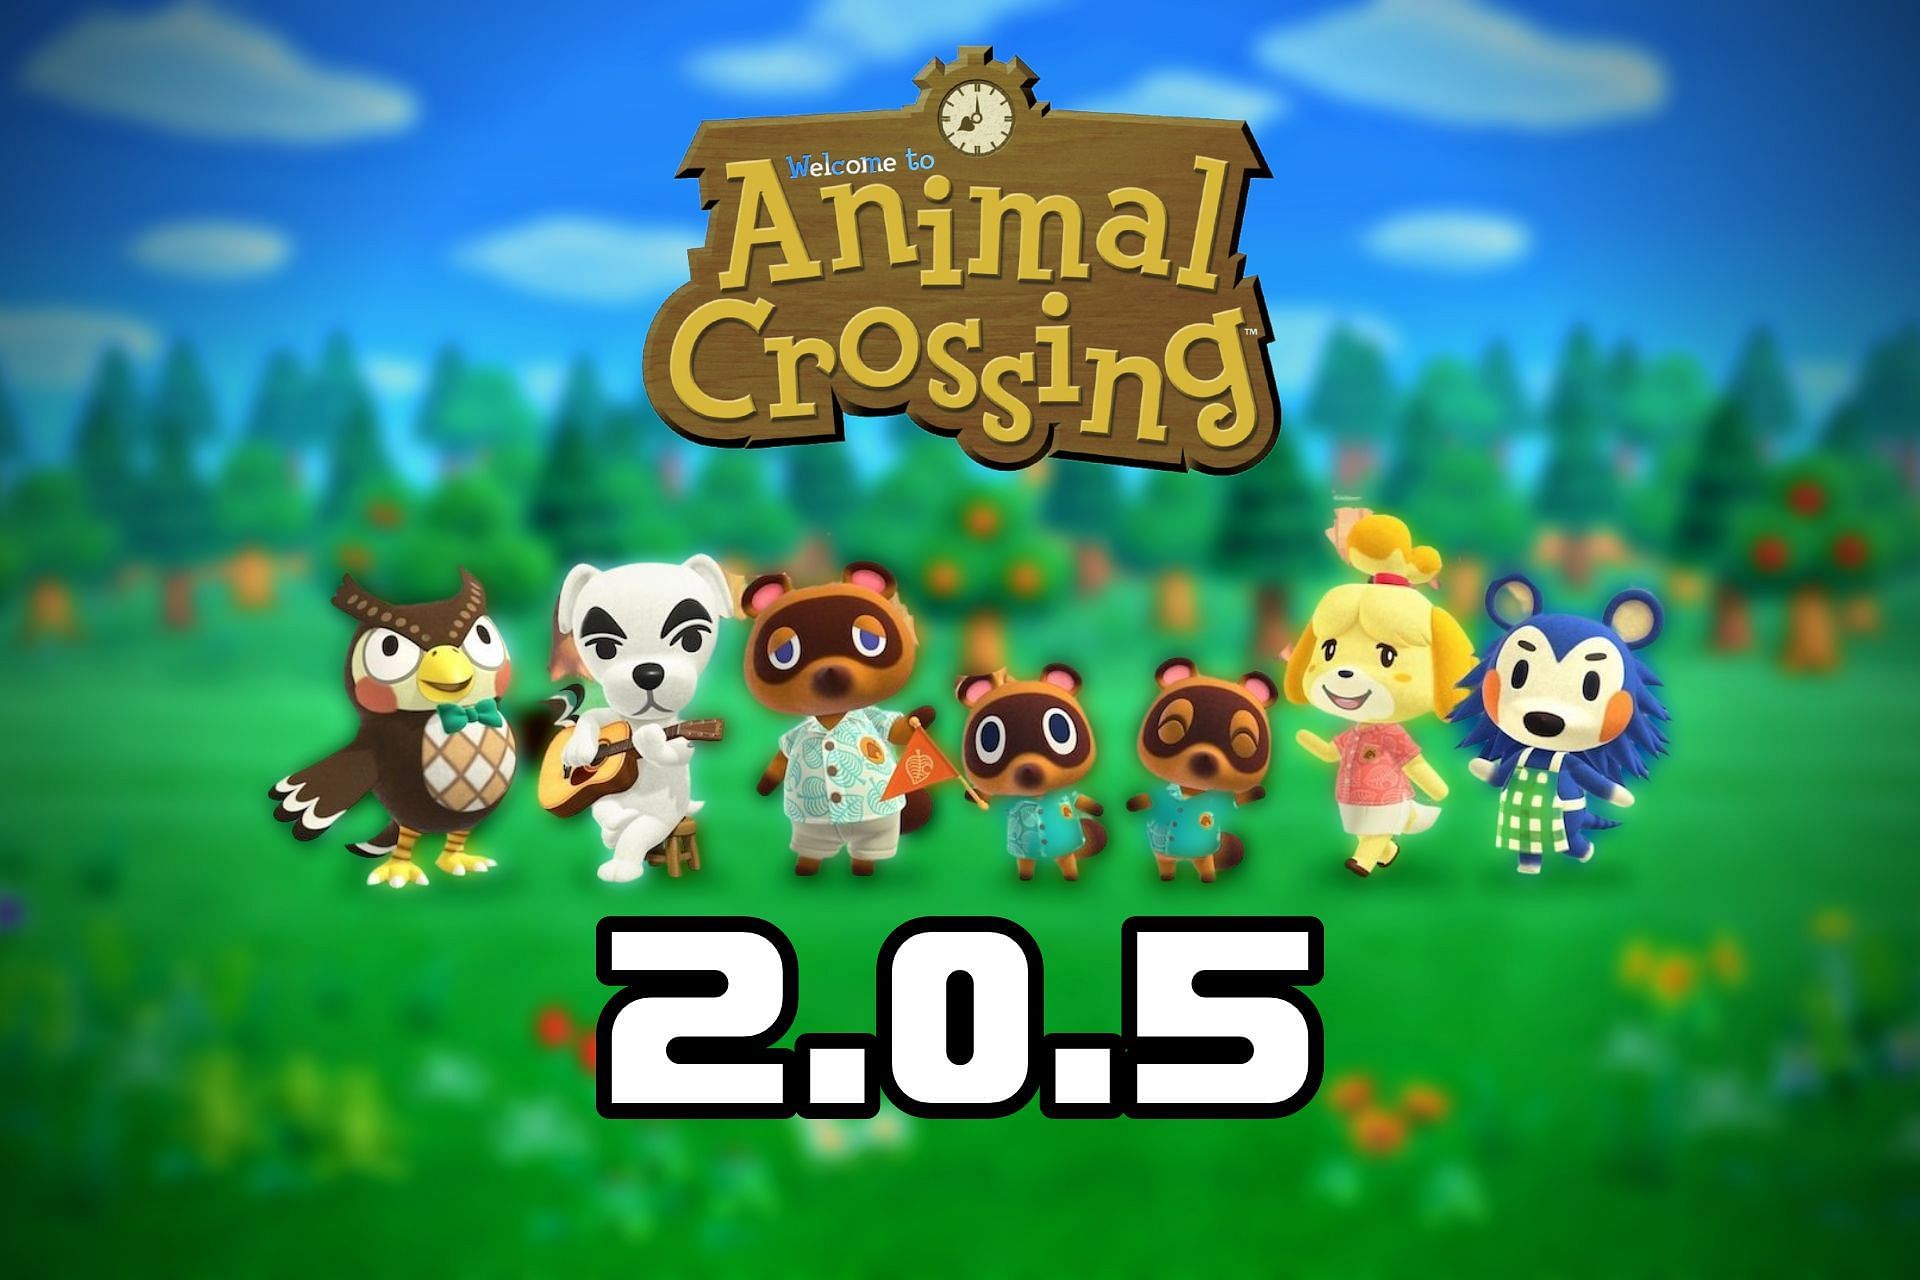 Animal Crossing: New Horizons sees a new patch update with version 2.0.5 (Image via Sportskeeda)